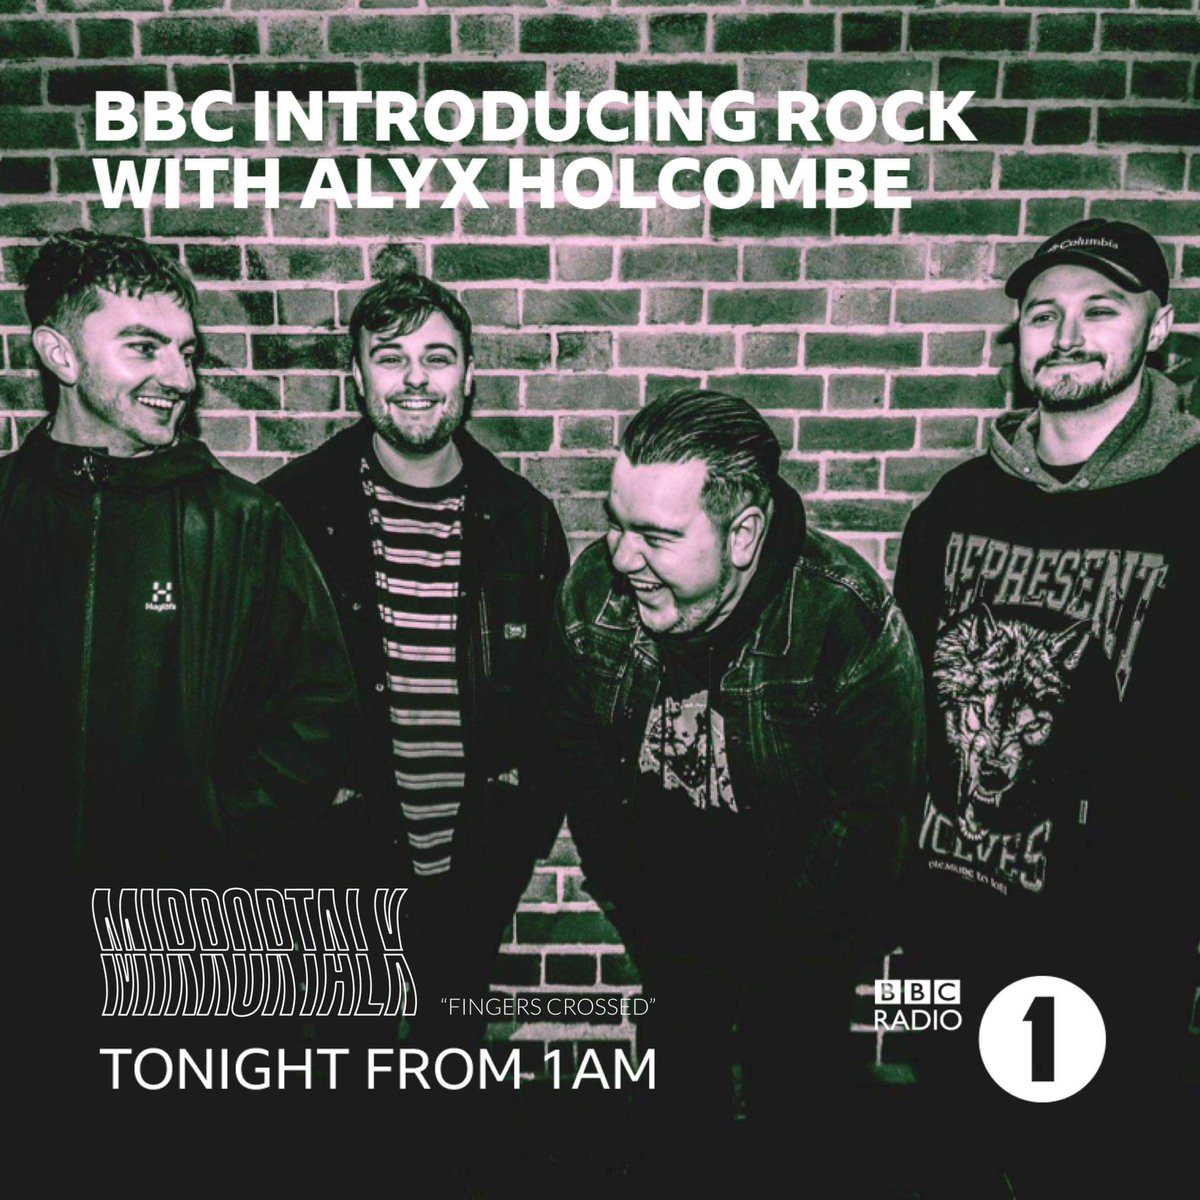 Tune in from 1am to hear Fingers Crossed on @BBCR1 !!!

Big shout out to @AlyxHolcombe and the Introducing Rock team for giving us the air time 🤟

Link in bio if you want to check it out!